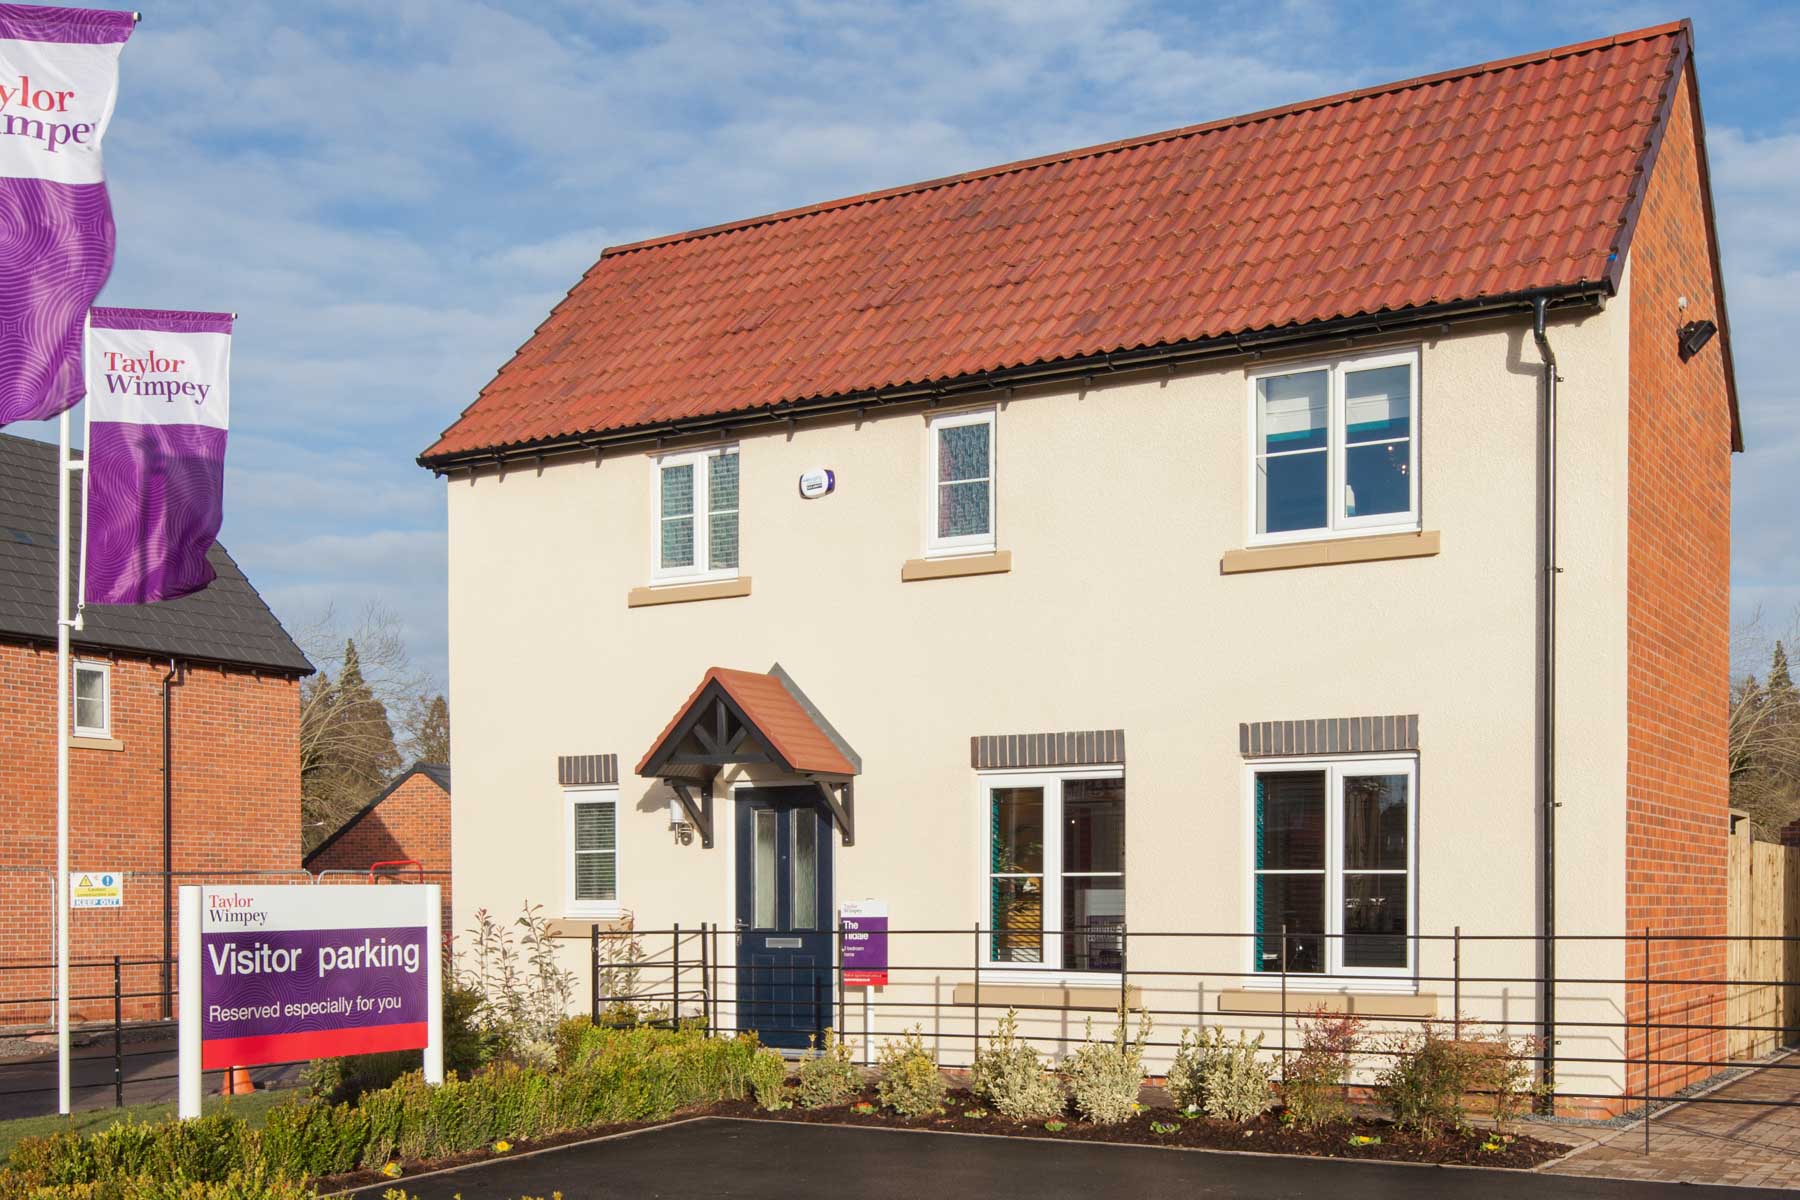 Taylor Wimpey The Tildale